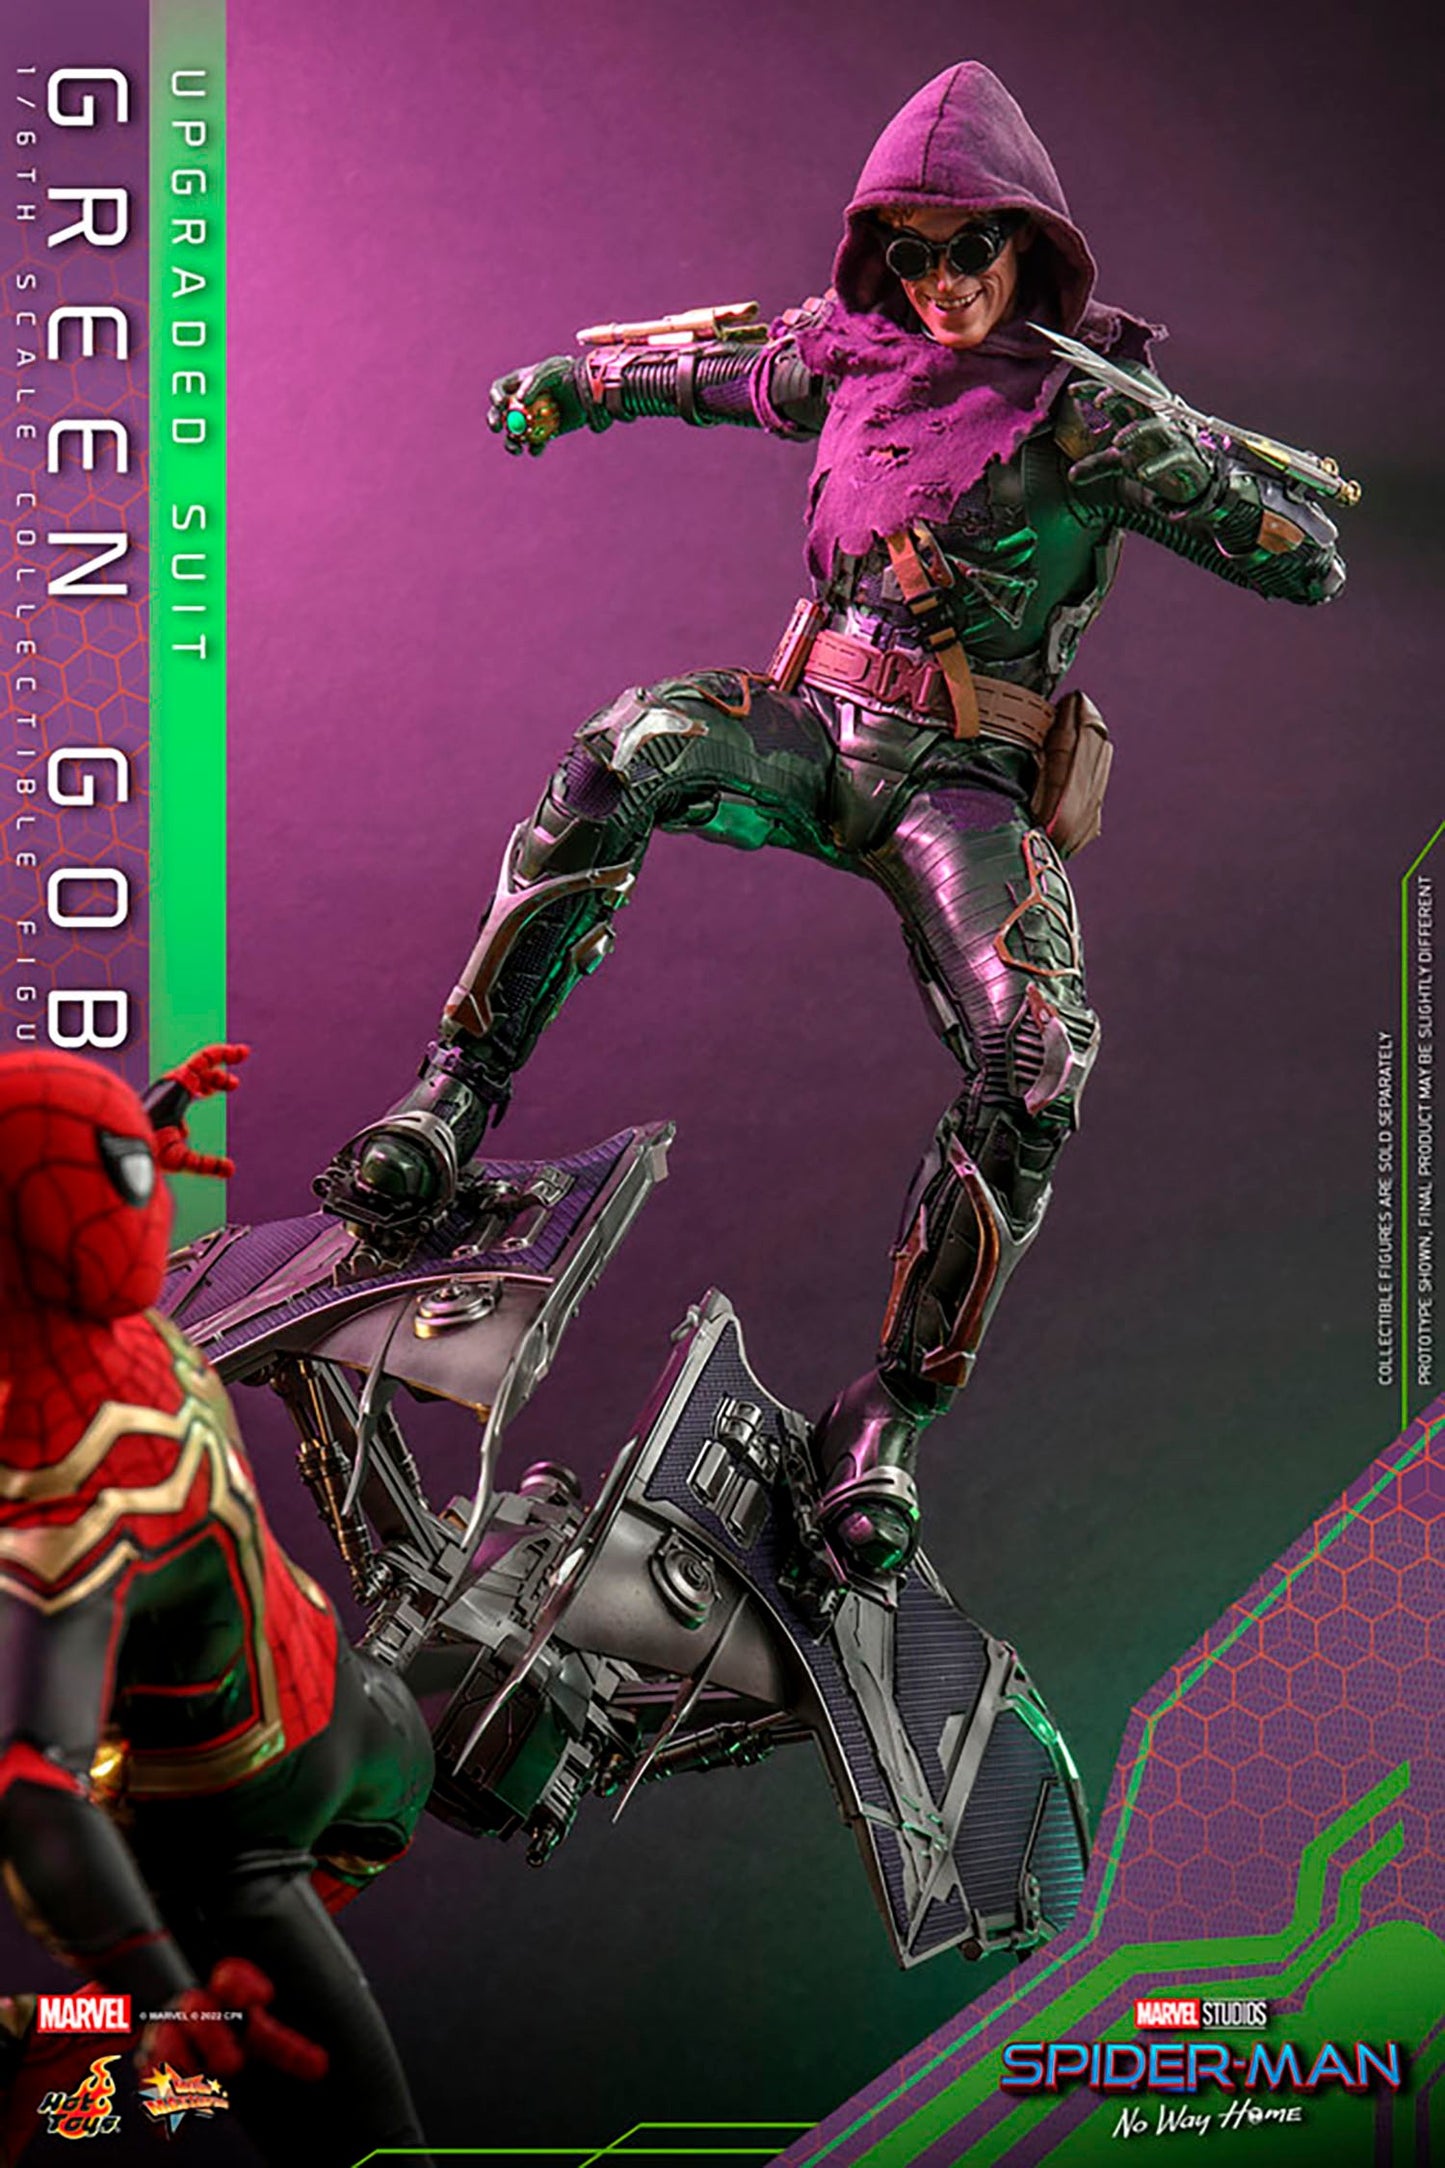 Green Goblin Upgraded Suit 1:6 Scale